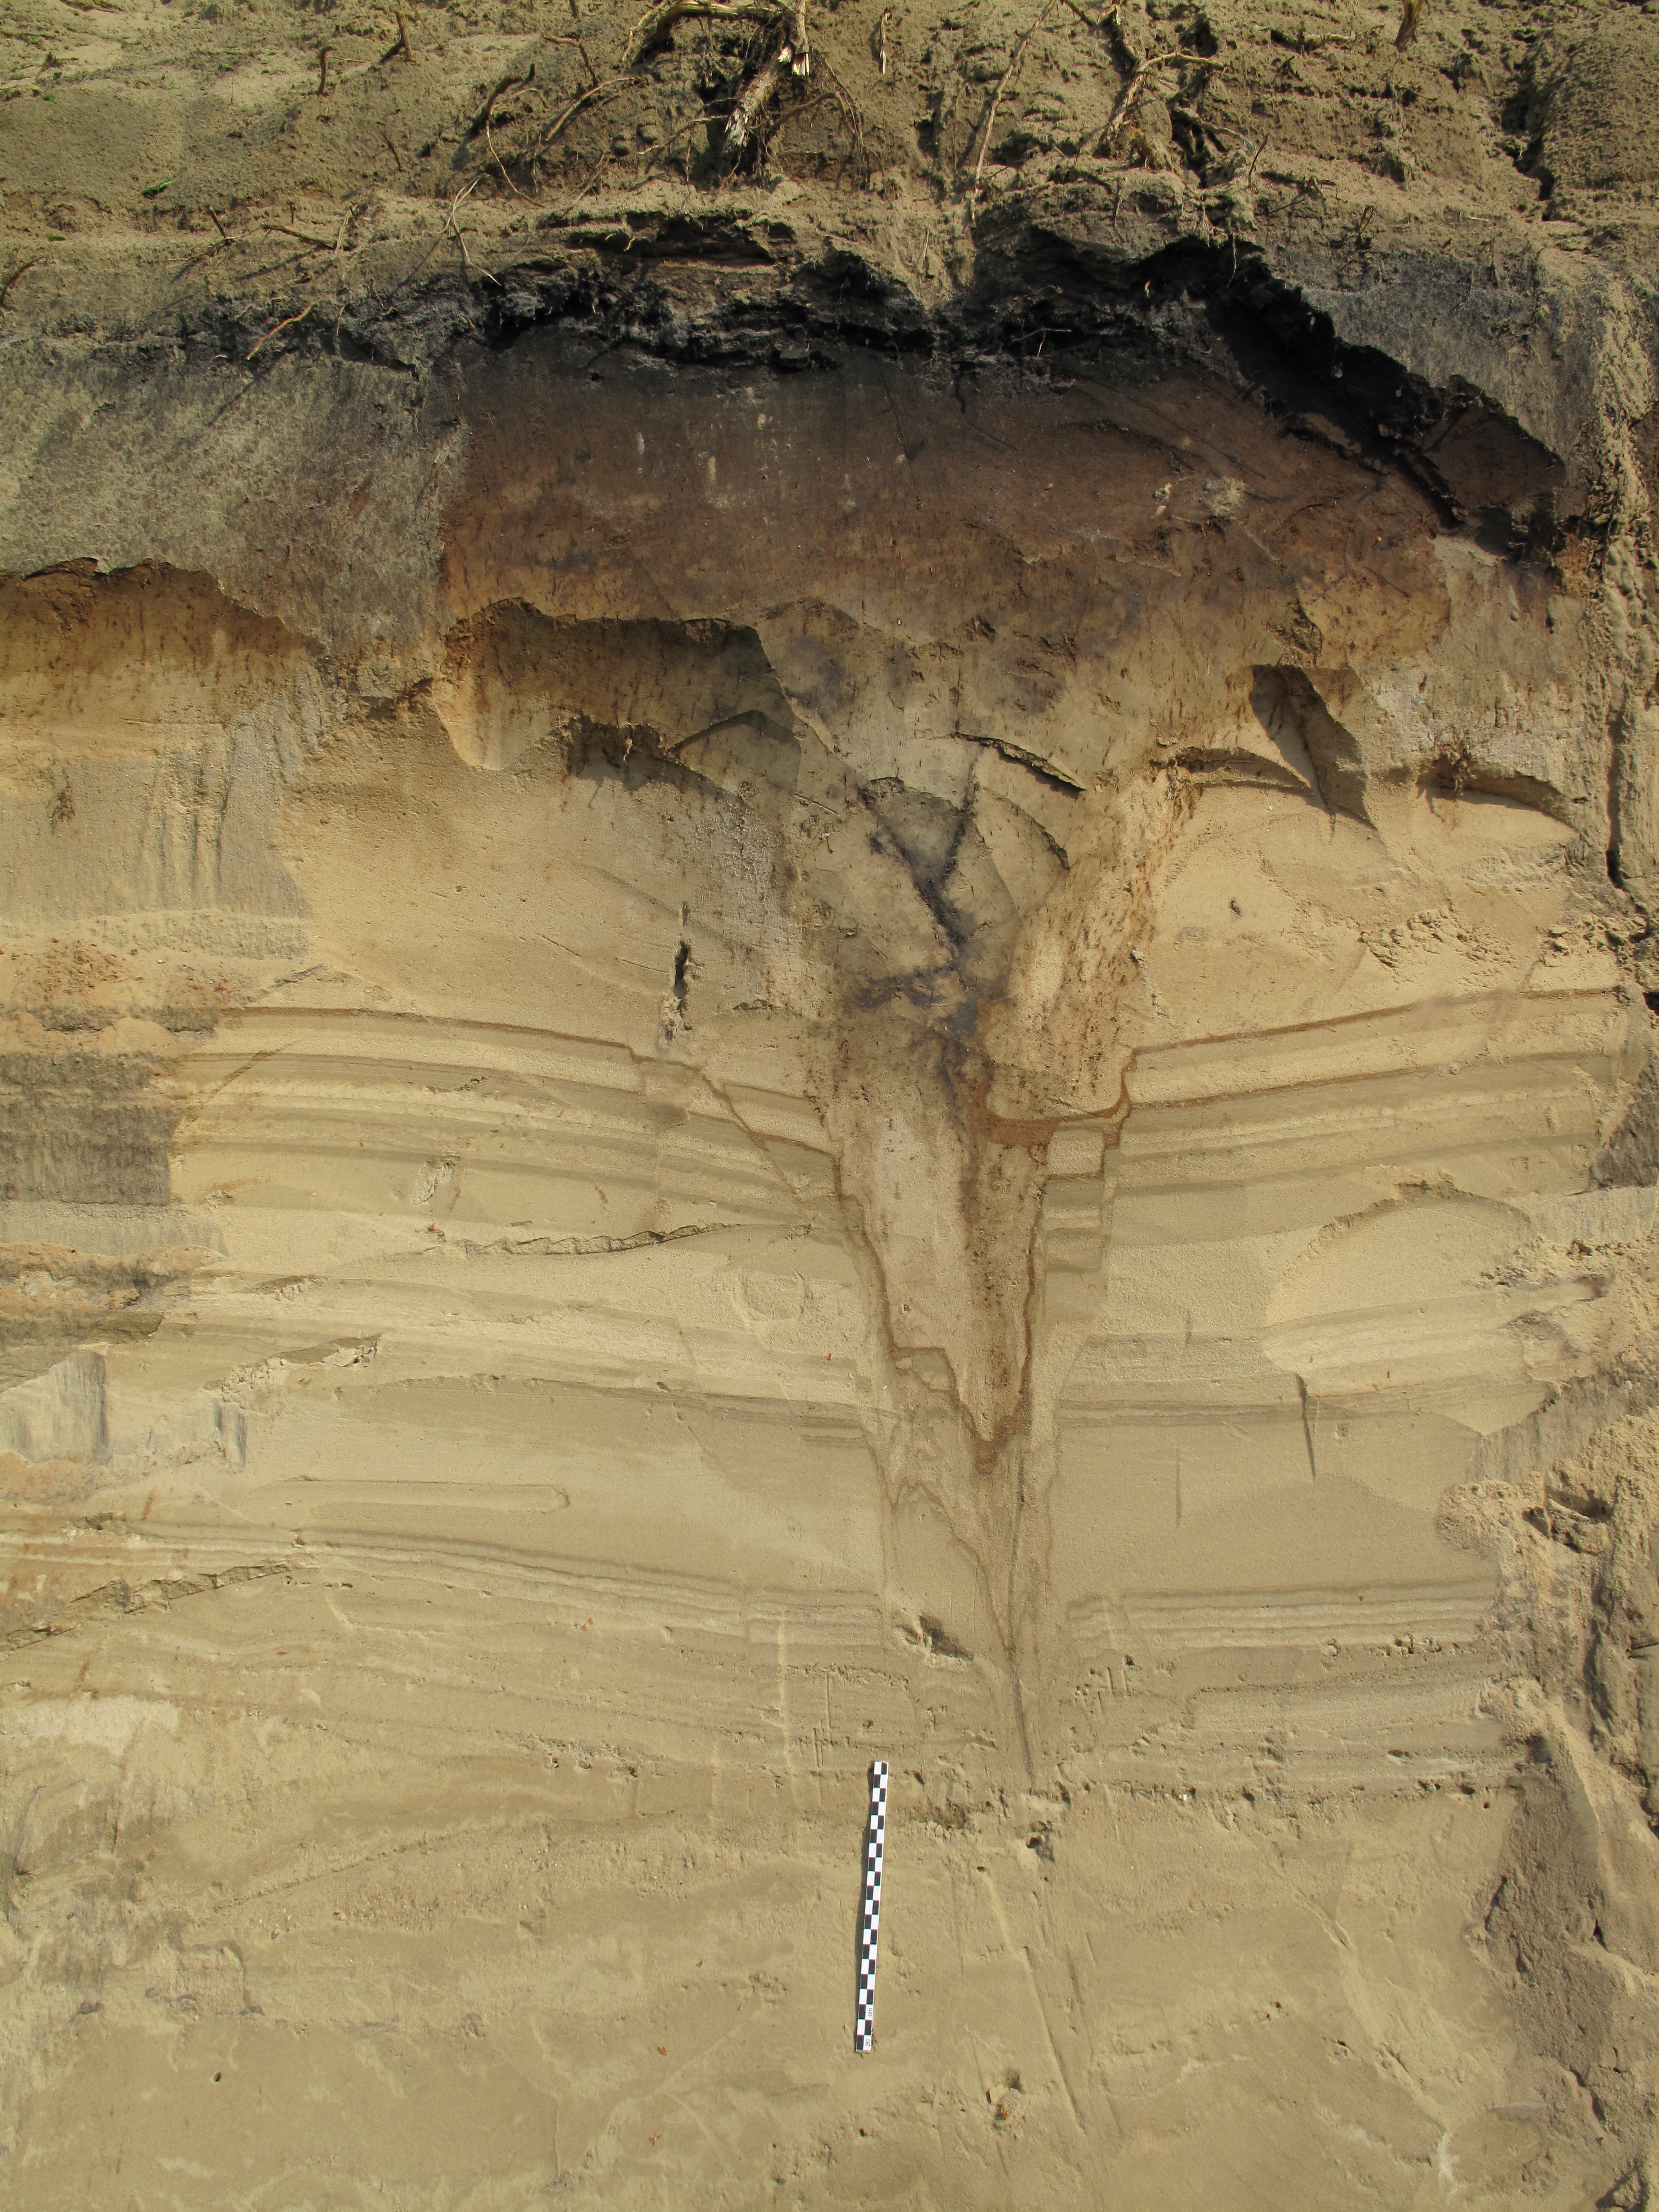 Gneiss Complex (NGC) imply the distal transport of these sediments.